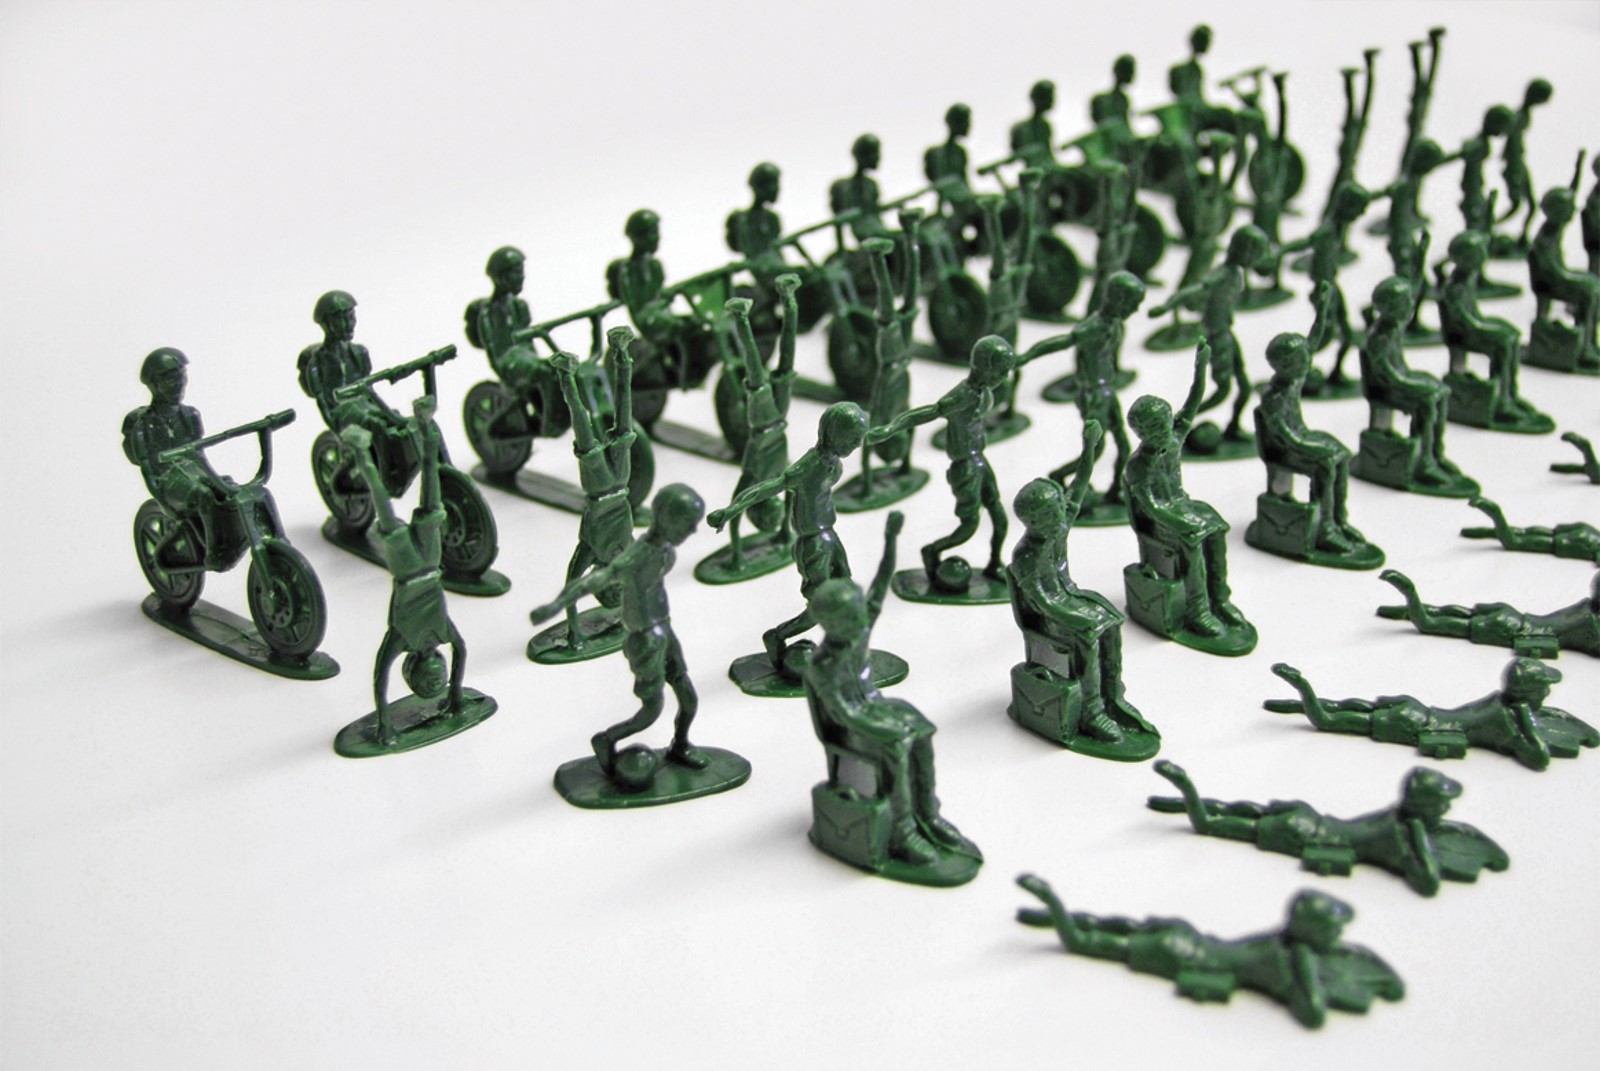 UNICEF Toy Soldiers example